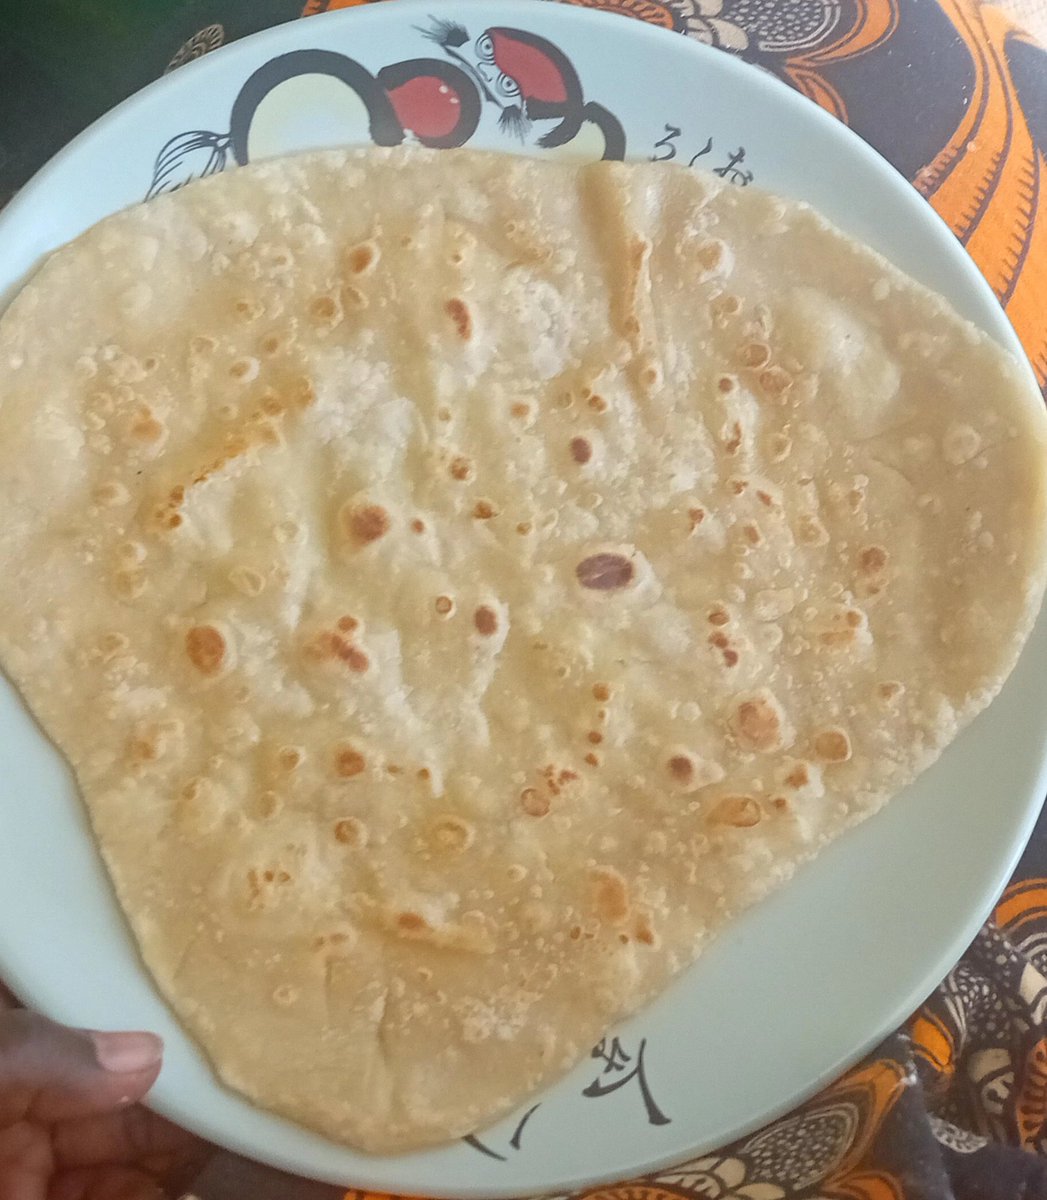 Was craving for a chapati and made one 🌚🌚